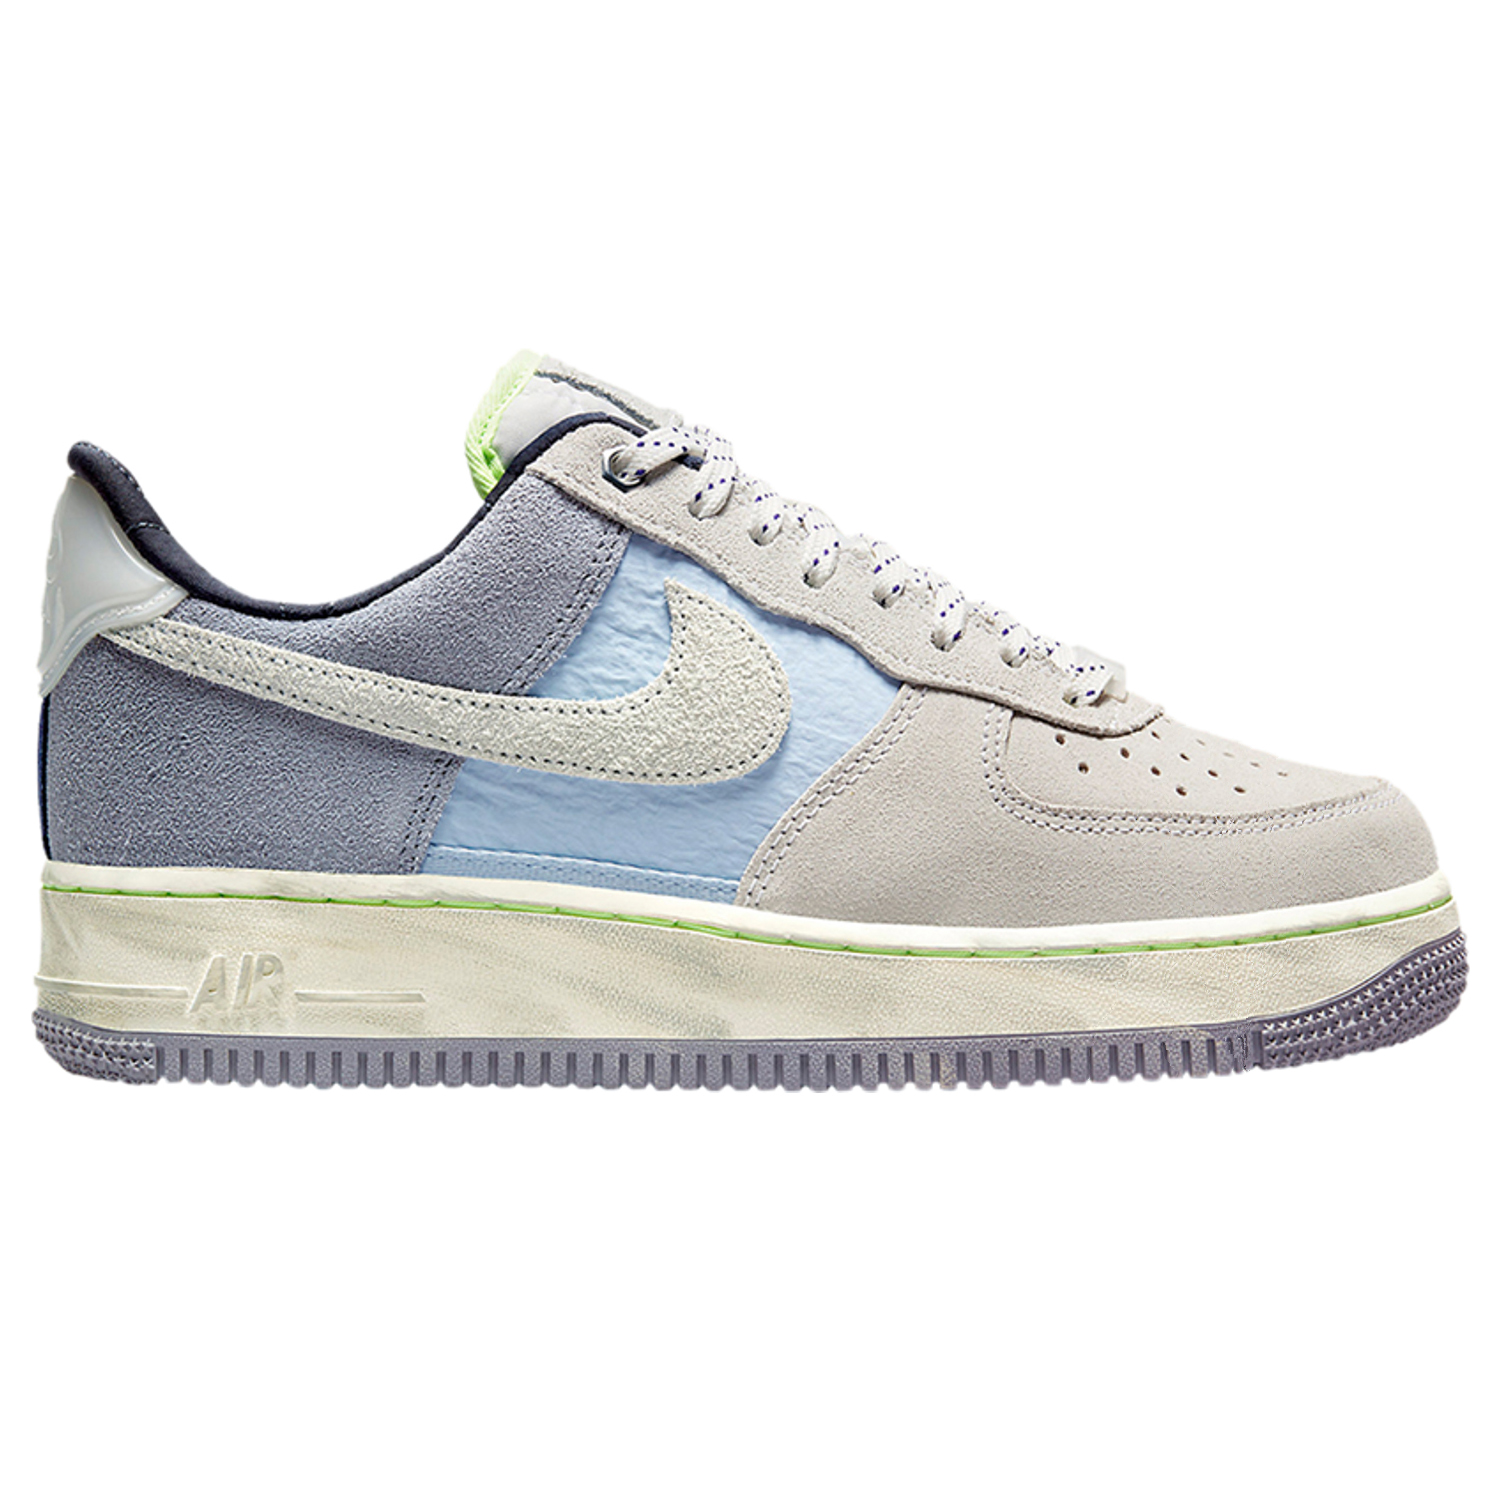 Кроссовки Nike Wmns Air Force 1 '07 LX 'Deep Freeze', Серый кроссовки nike wmns air force 1 07 lx lucky charms белый